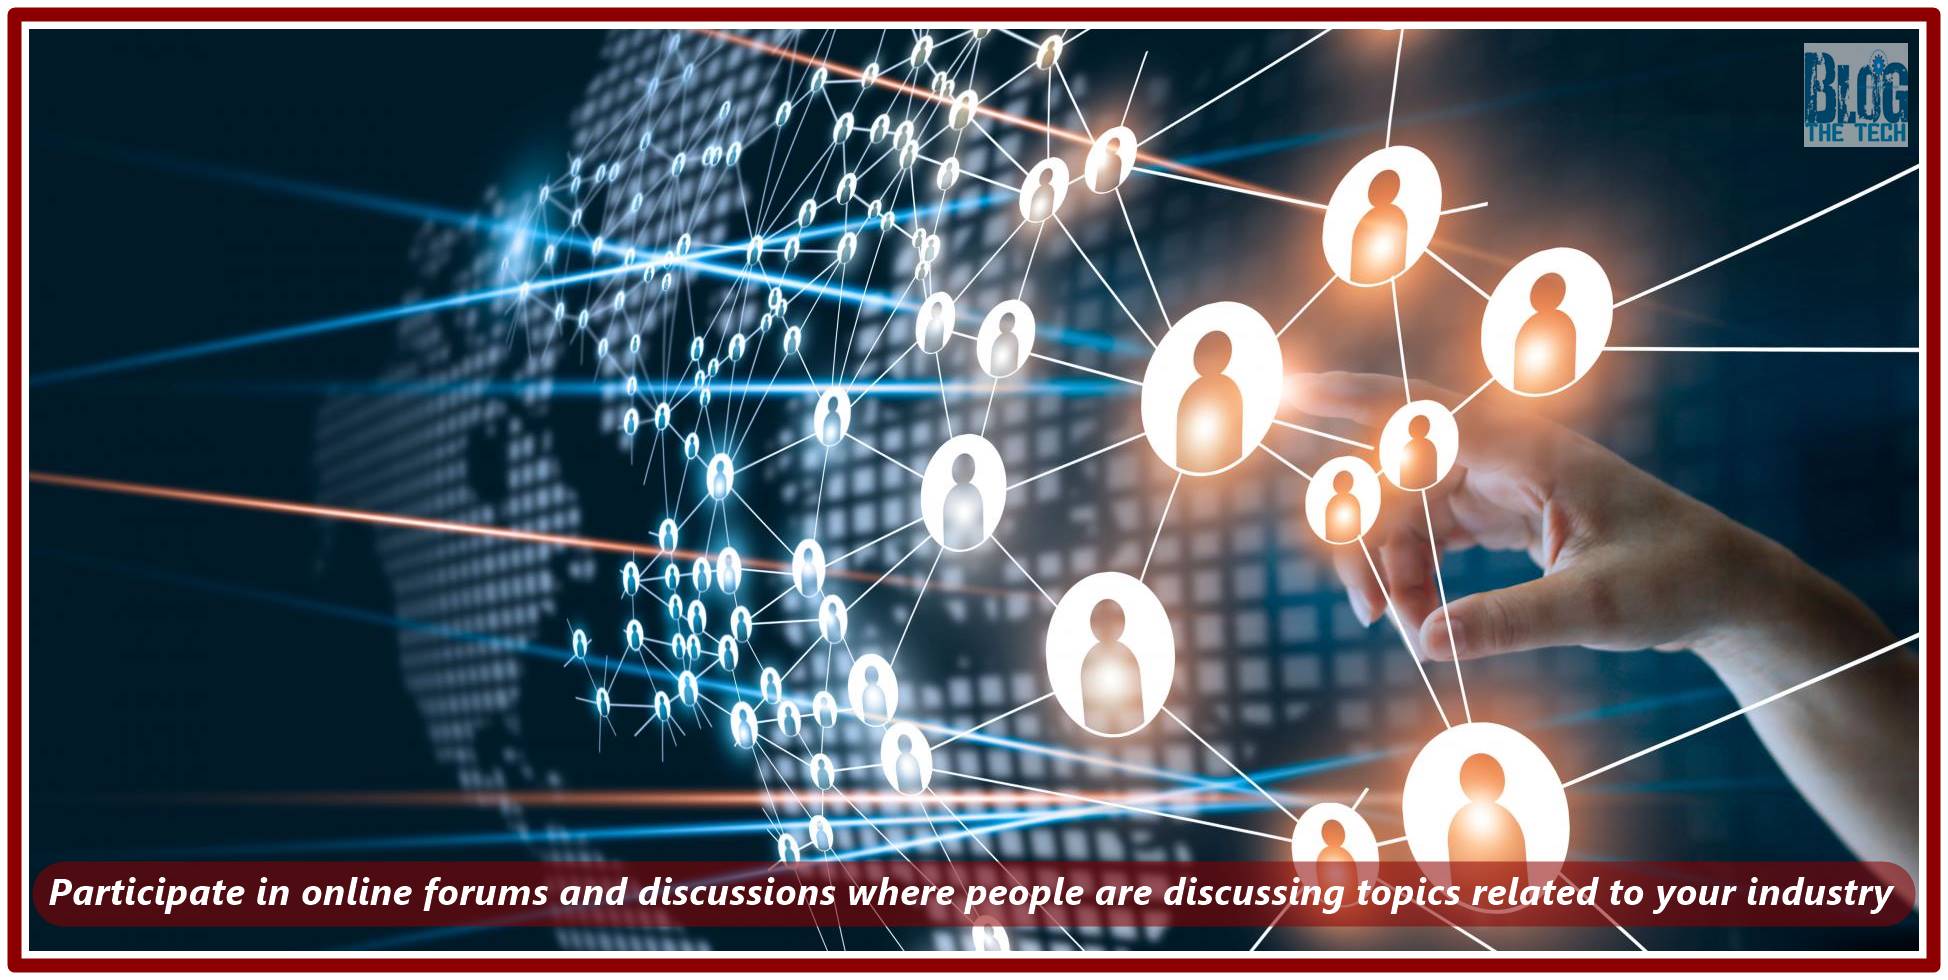 Participate in online forums and discussions where people are discussing topics related to your industry